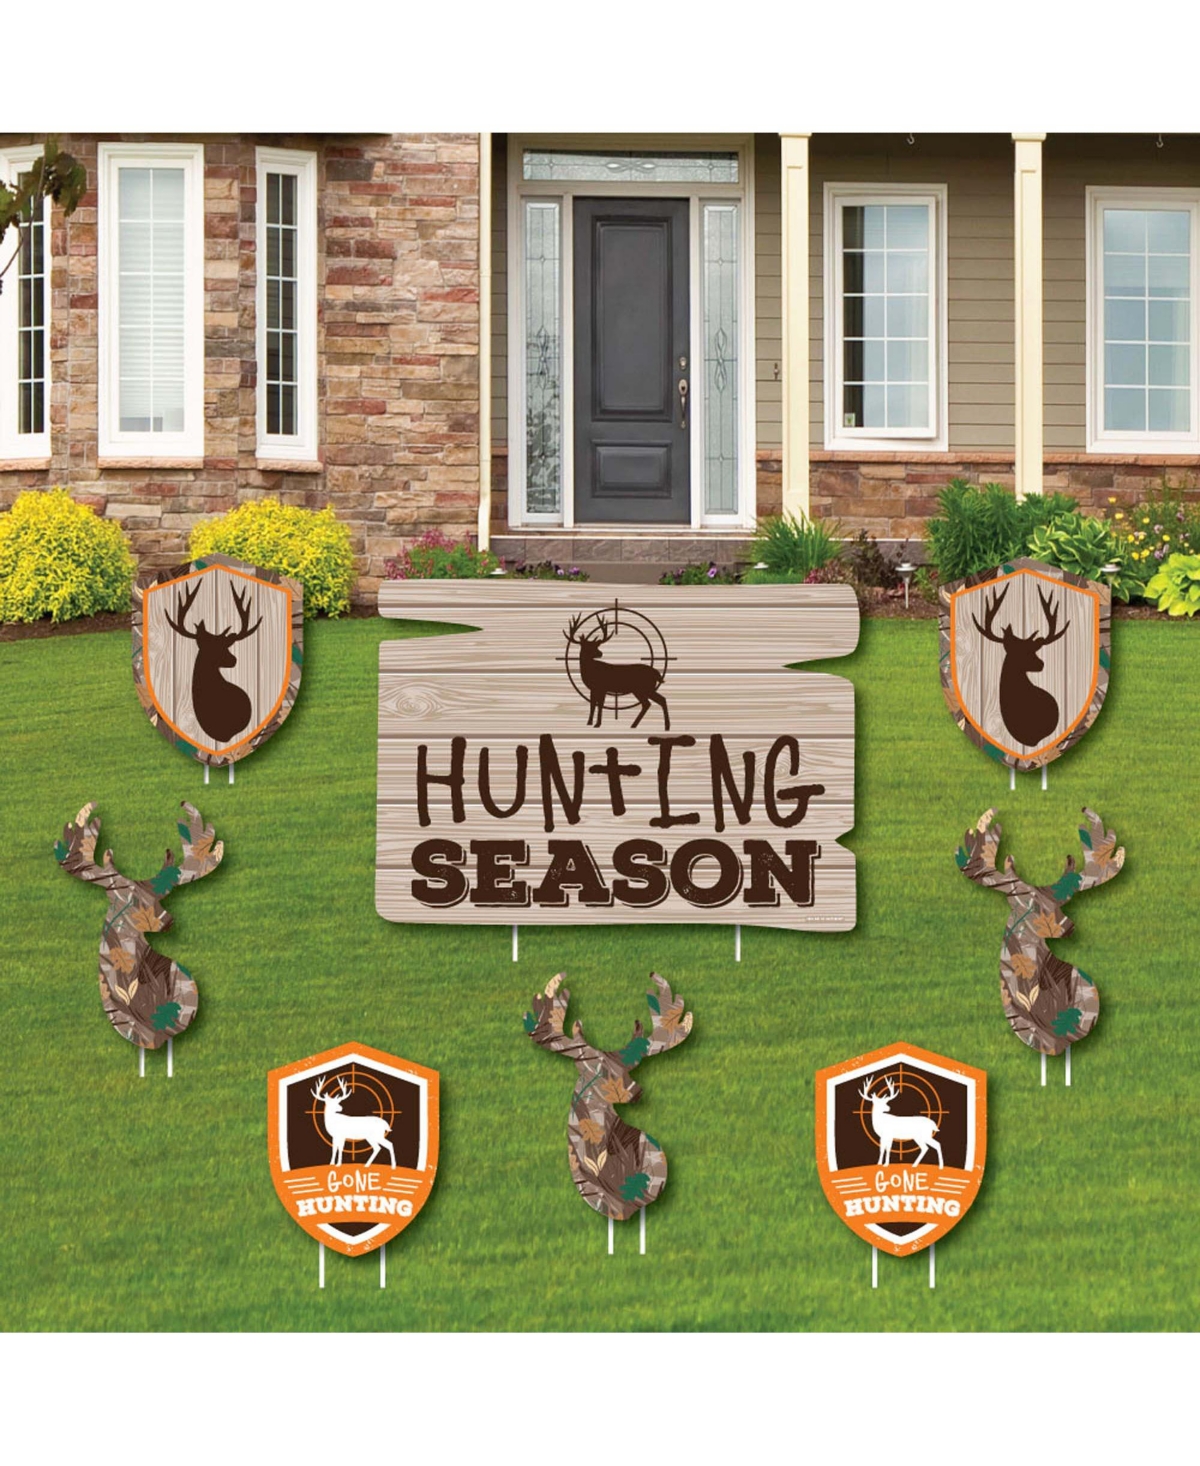 Gone Hunting - Lawn Decor - Camo Baby Shower or Birthday Yard Signs - Set of 8